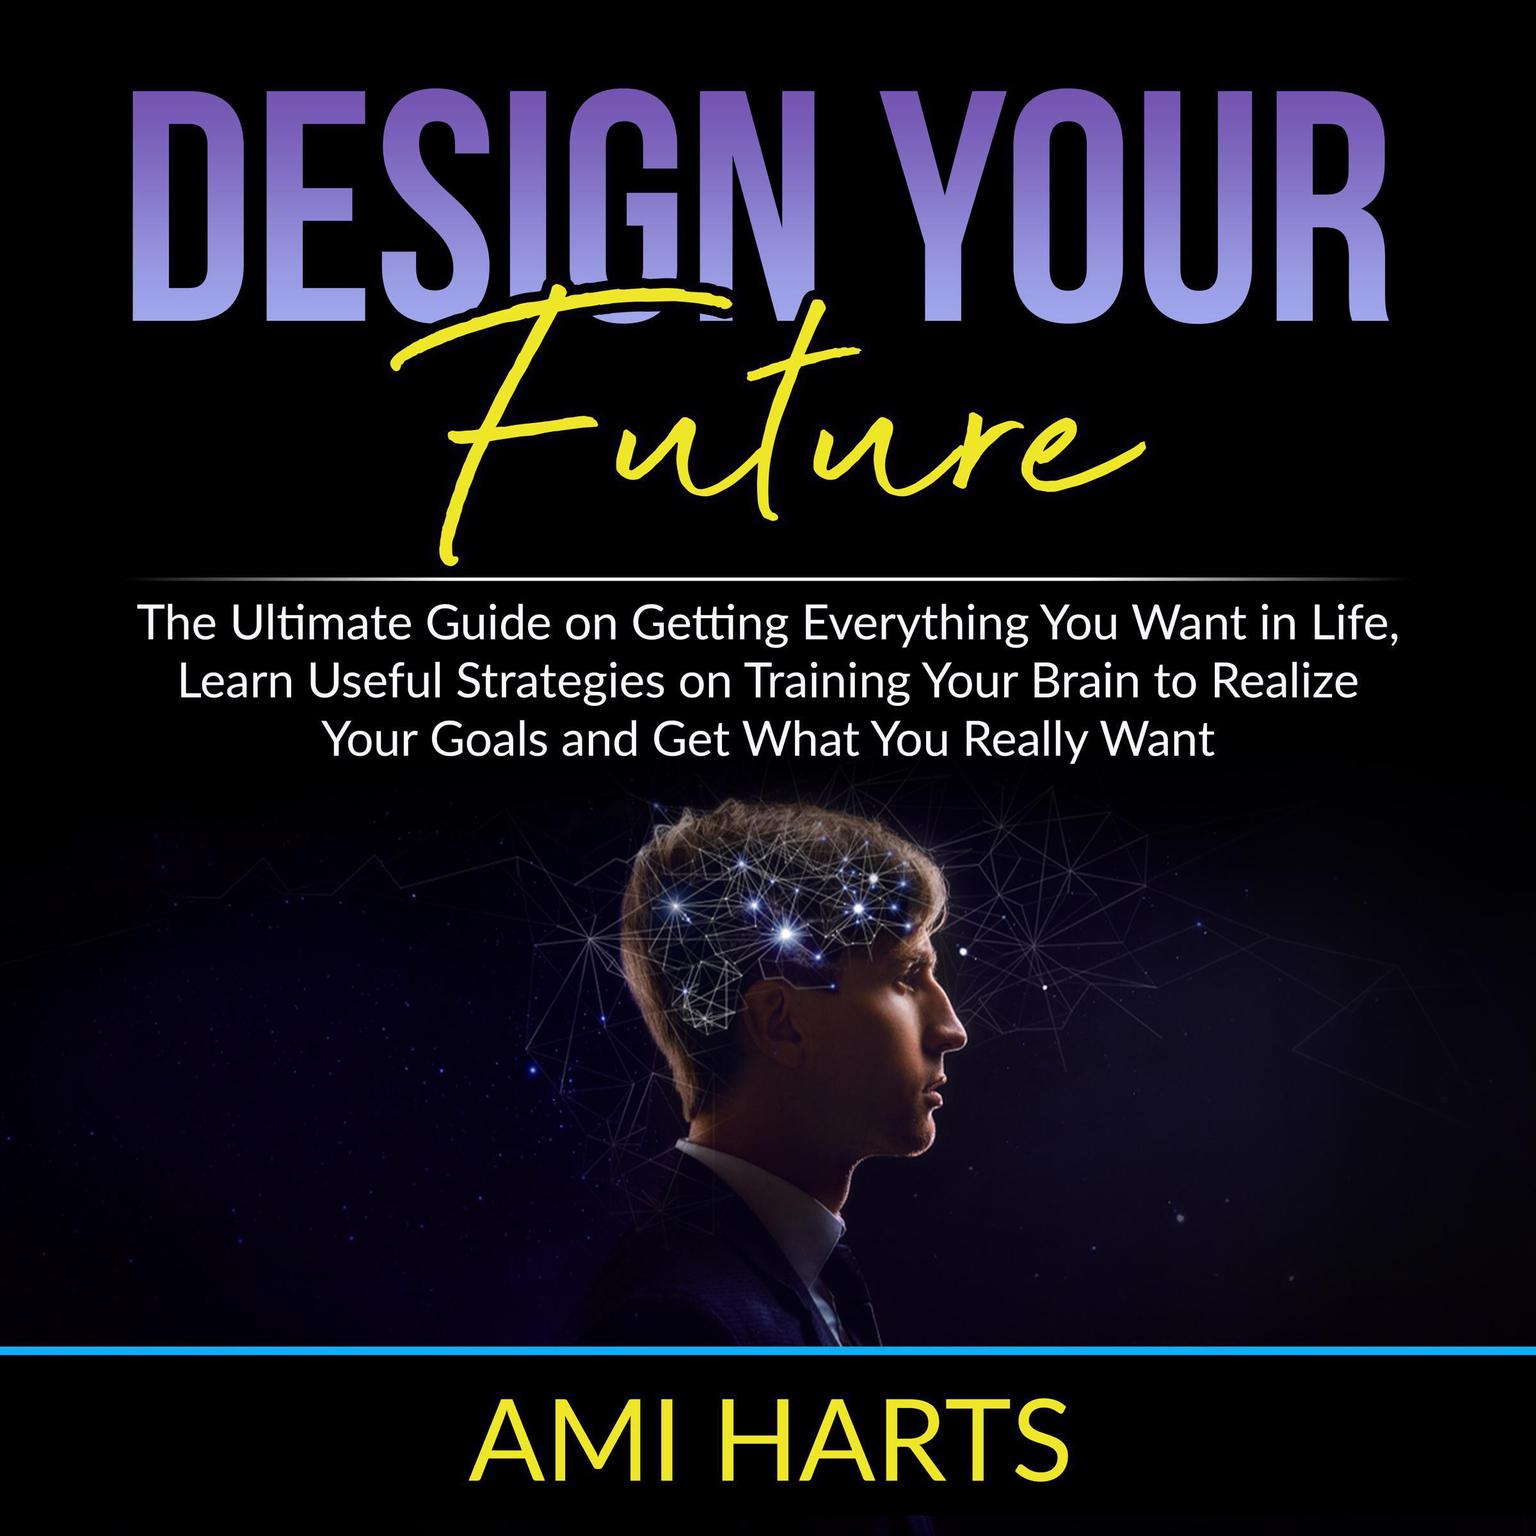 Design Your Future: The Ultimate Guide on Getting Everything You Want in Life, Learn Useful Strategies on Training Your Brain to Realize Your Goals and Get What You Really Want Audiobook, by Ami Harts